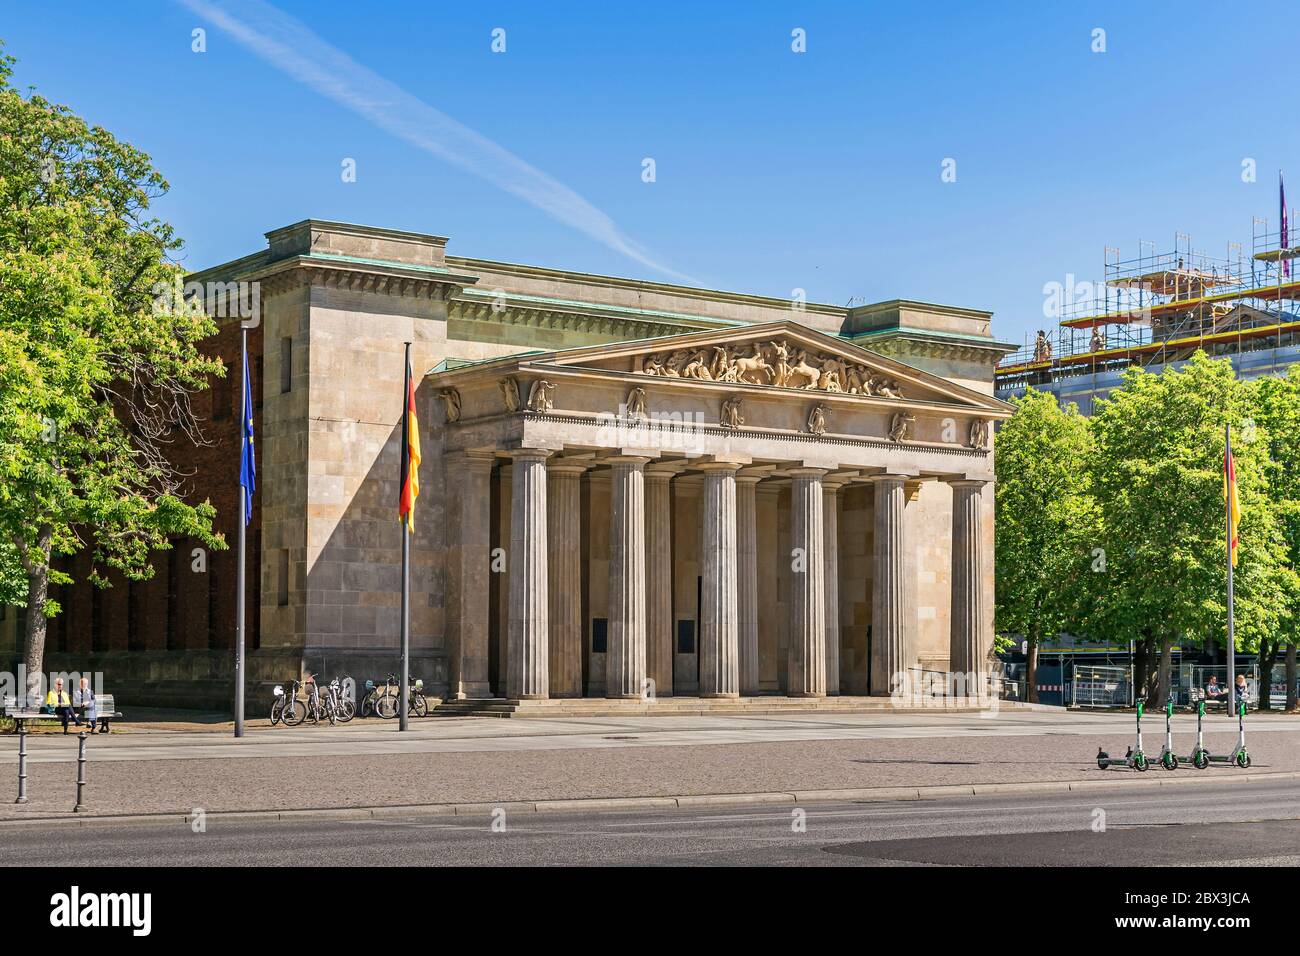 Berlin, Germany -  May 29, 2020: Neoclassical portal of the Neue Wache (New Guardhouse), a war memorial  on the north side of the Unter den Linden bou Stock Photo